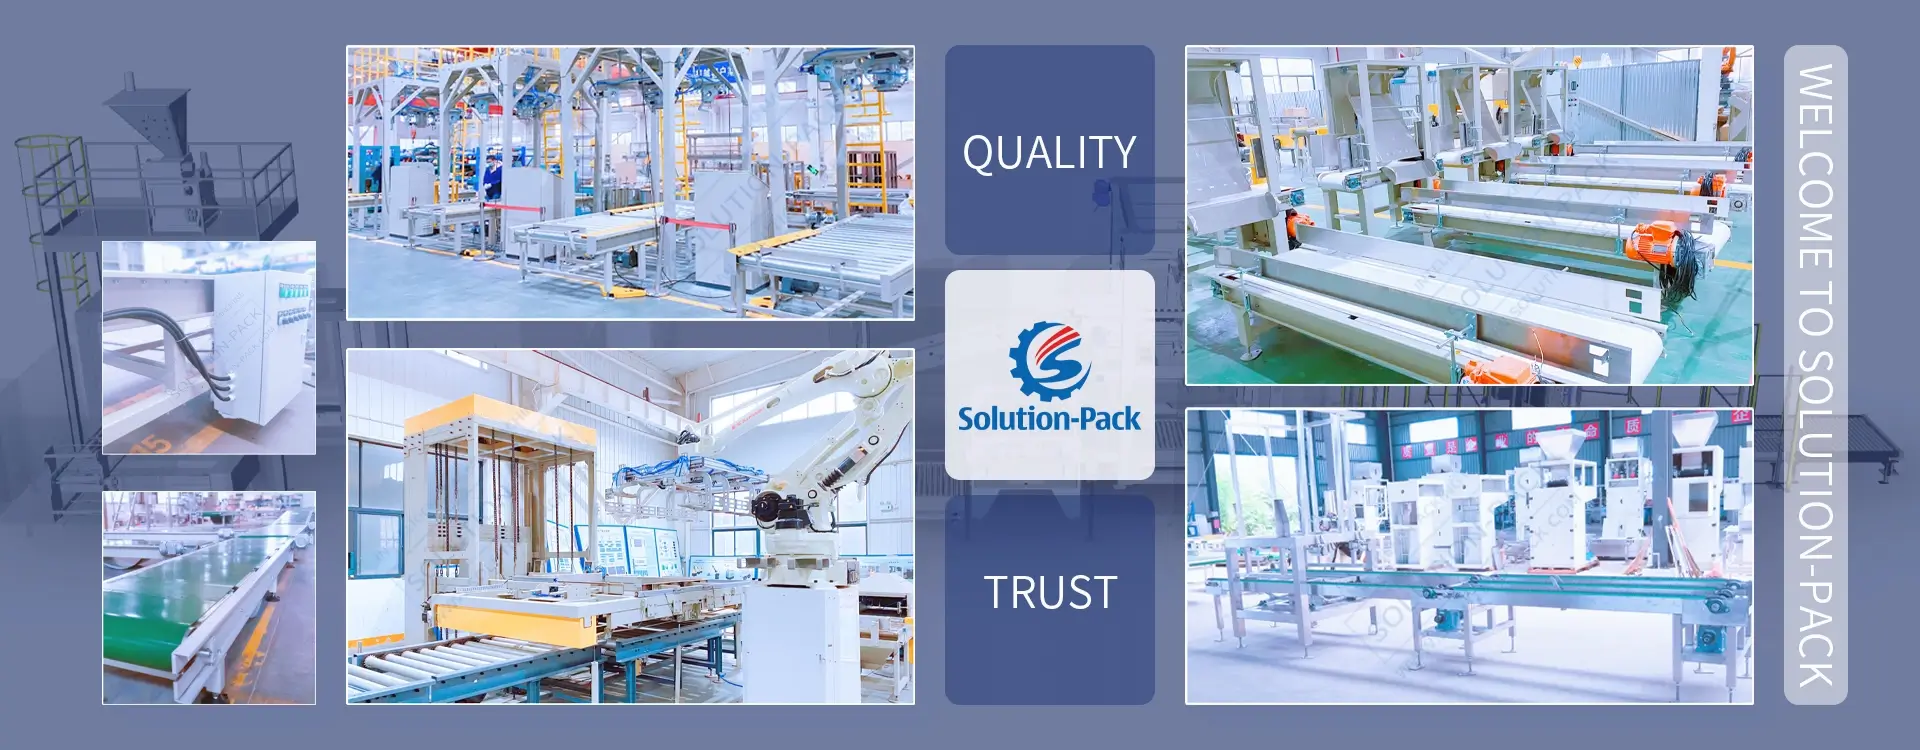 Model HZ25B Semi-Automatic Manual Bagging Machine Equipment Bottom Banner Picture | Solution-Pack